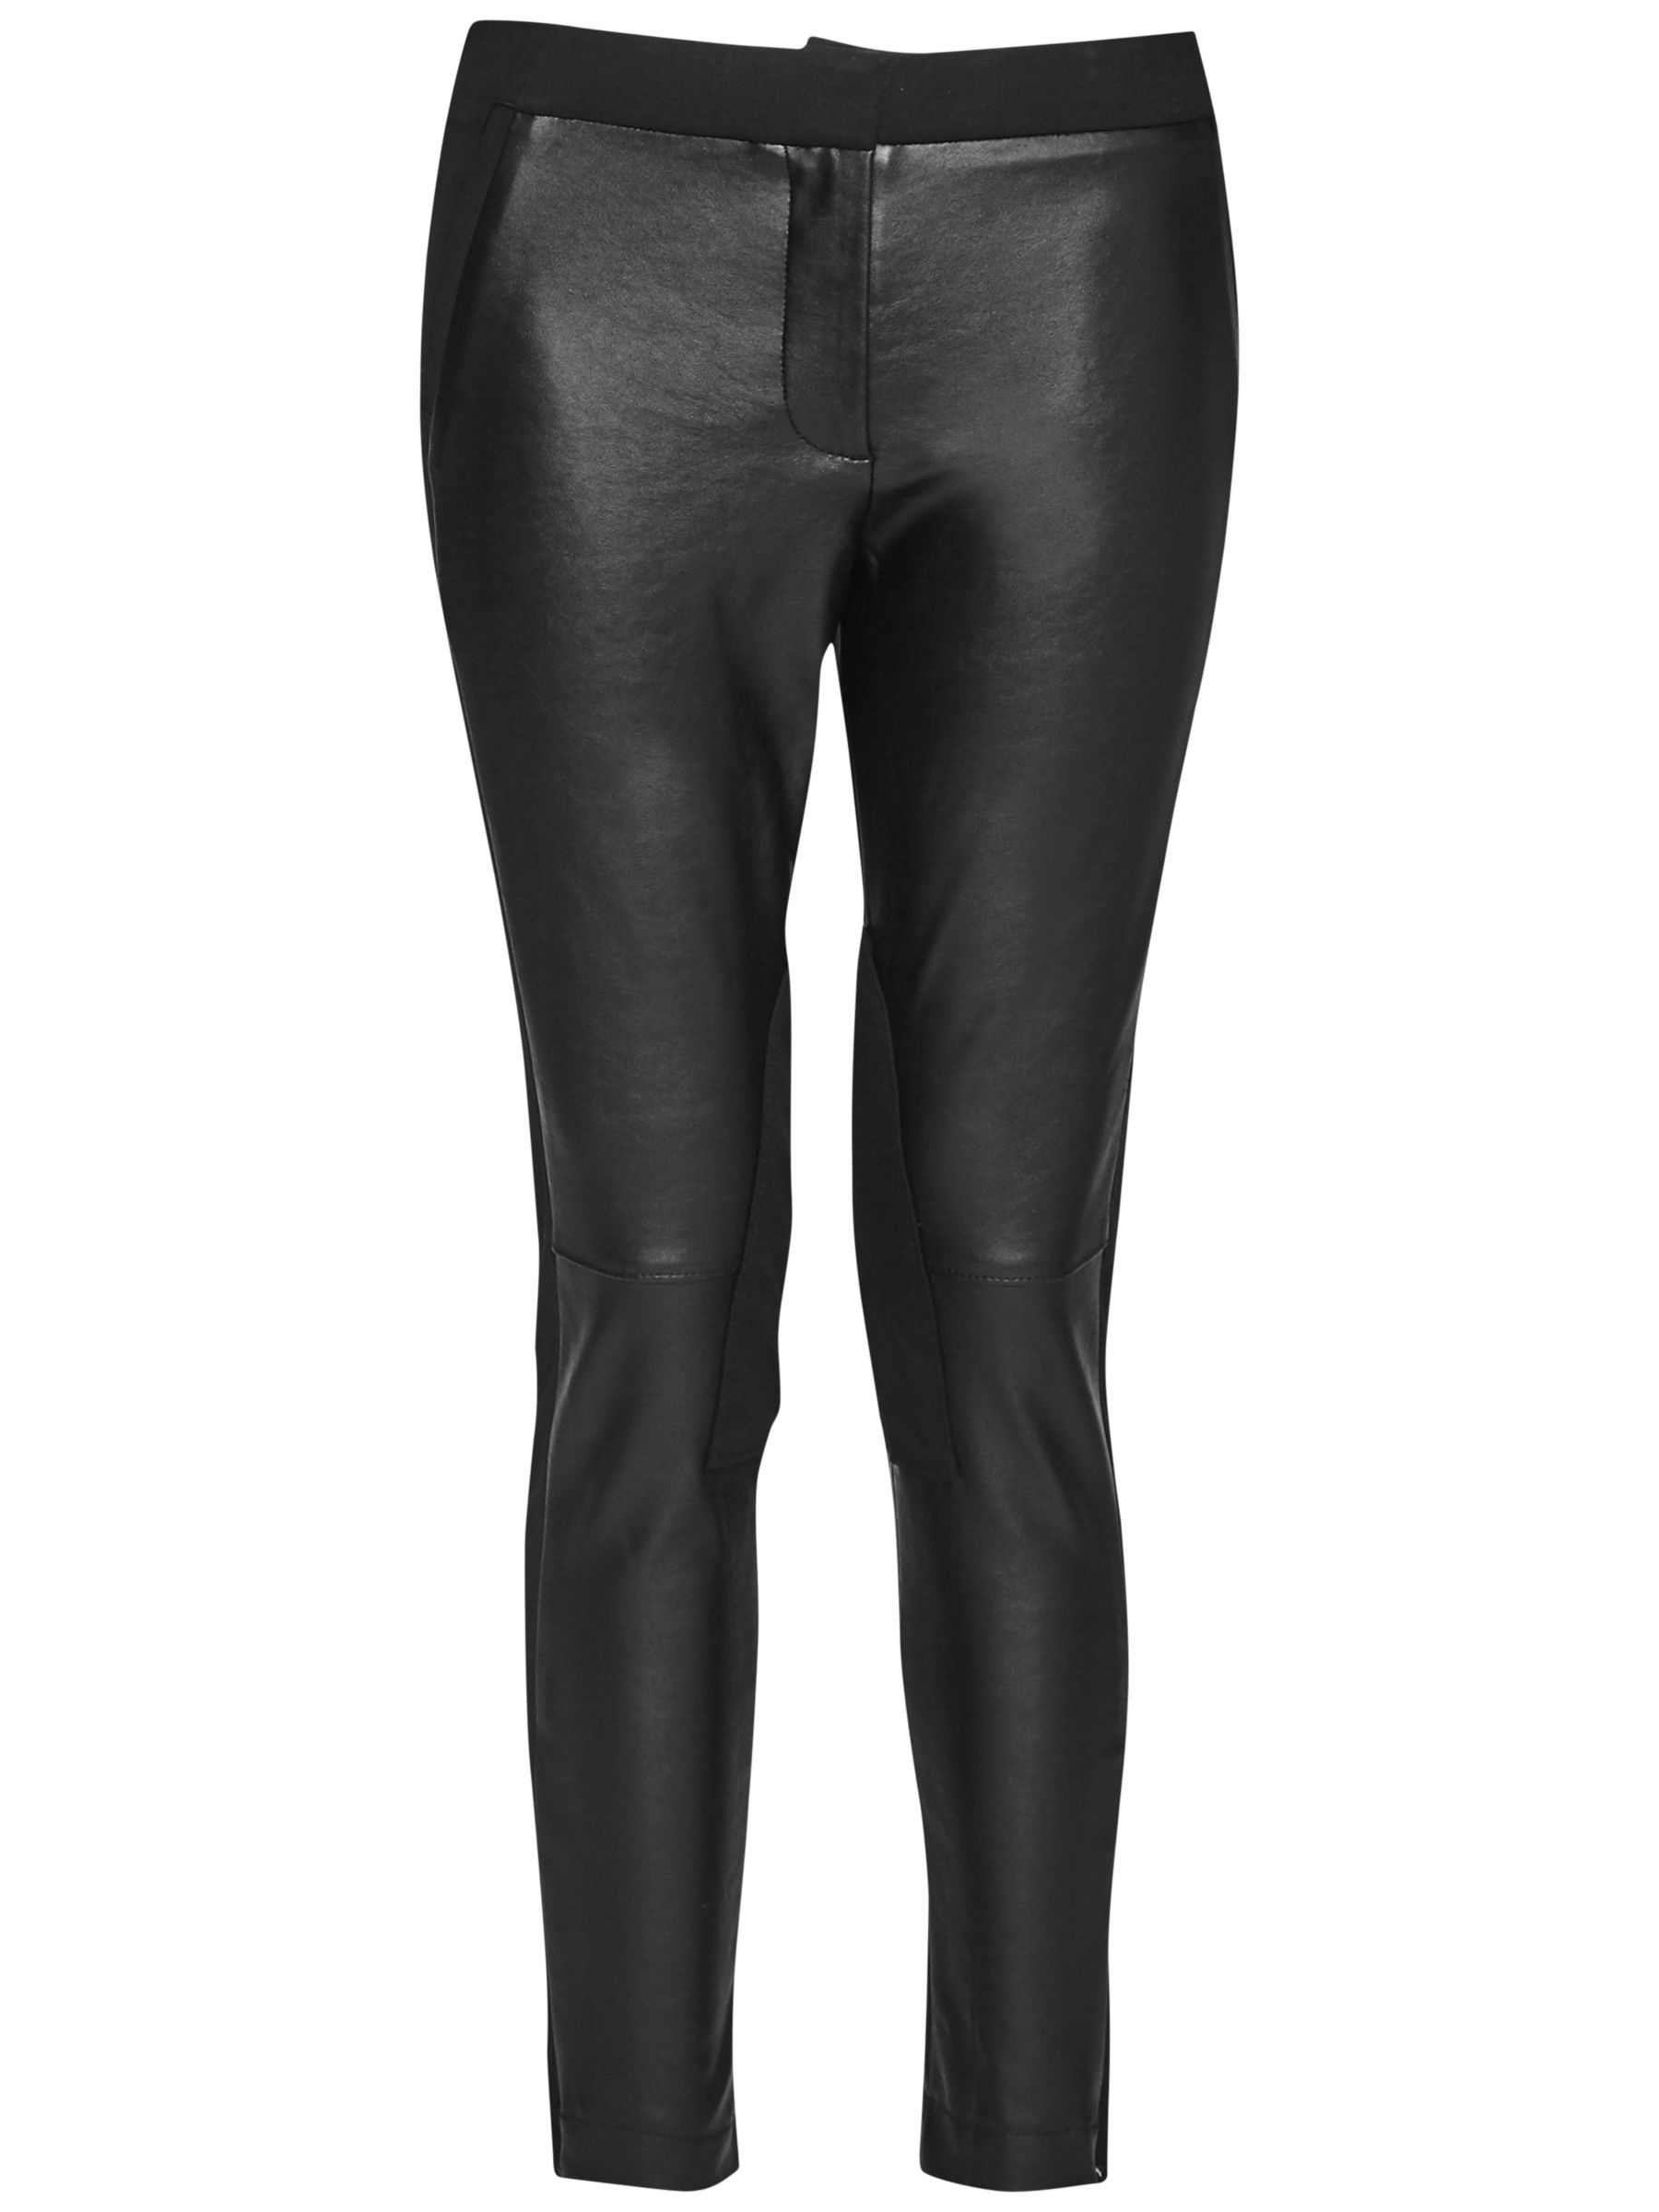 French Connection Street Faux-Leather Trousers, Black